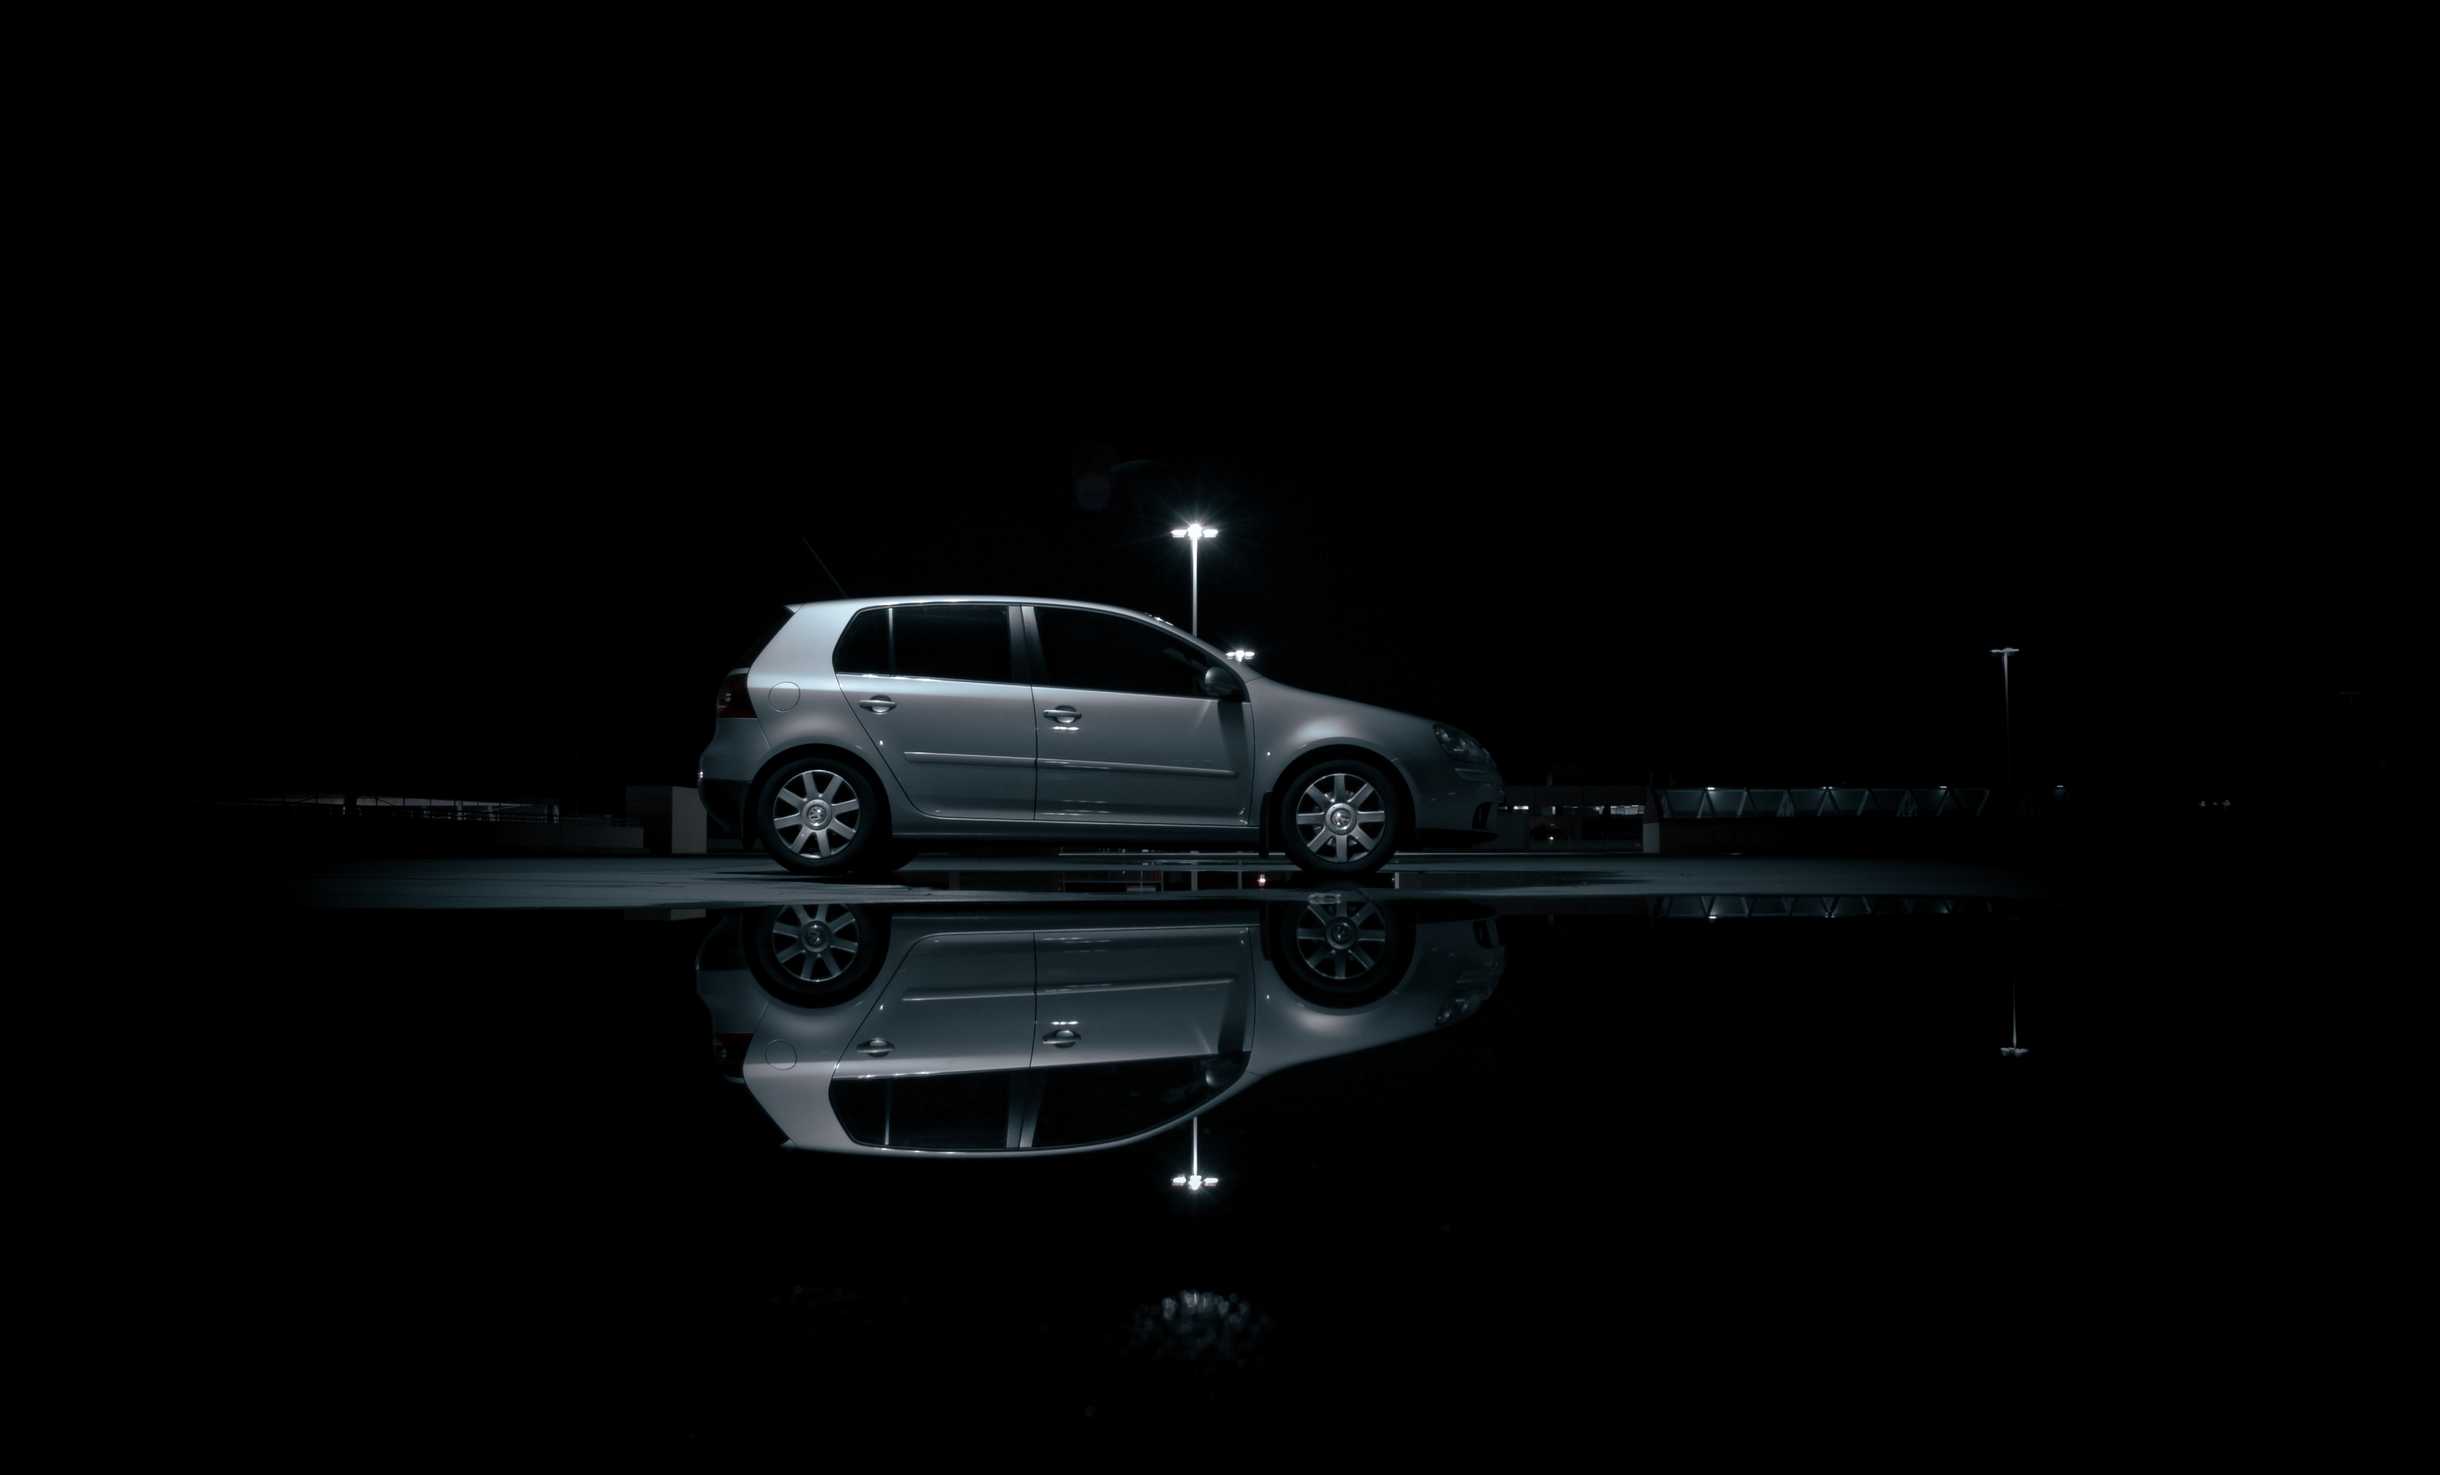 Side on view with a VW Golf reflection in a puddle